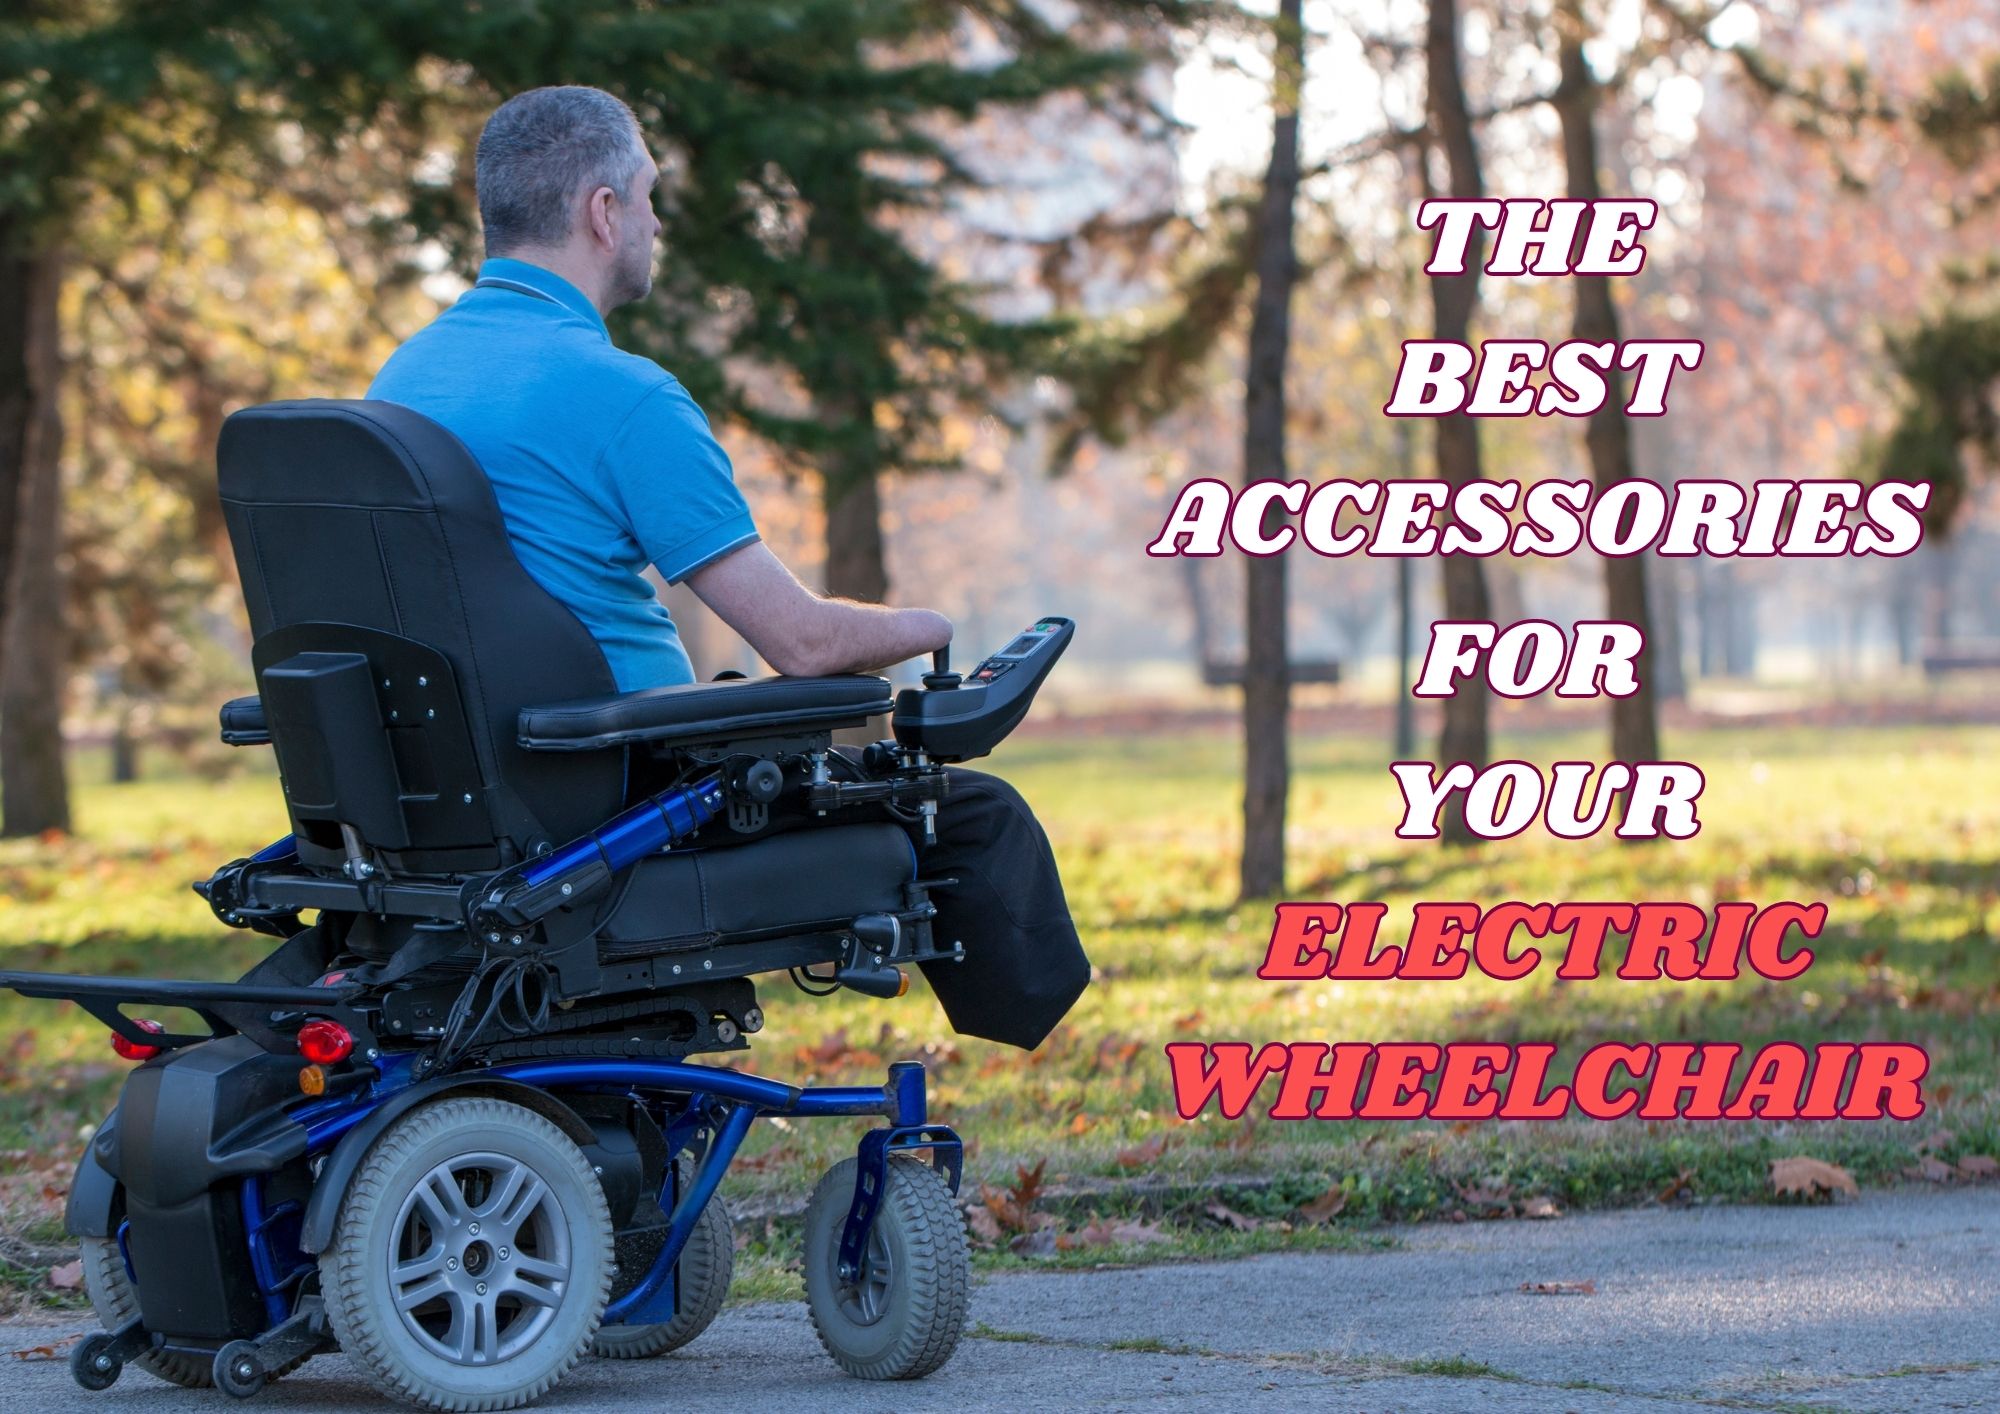 The Best Accessories for Your Electric Wheelchair - Posting Trend